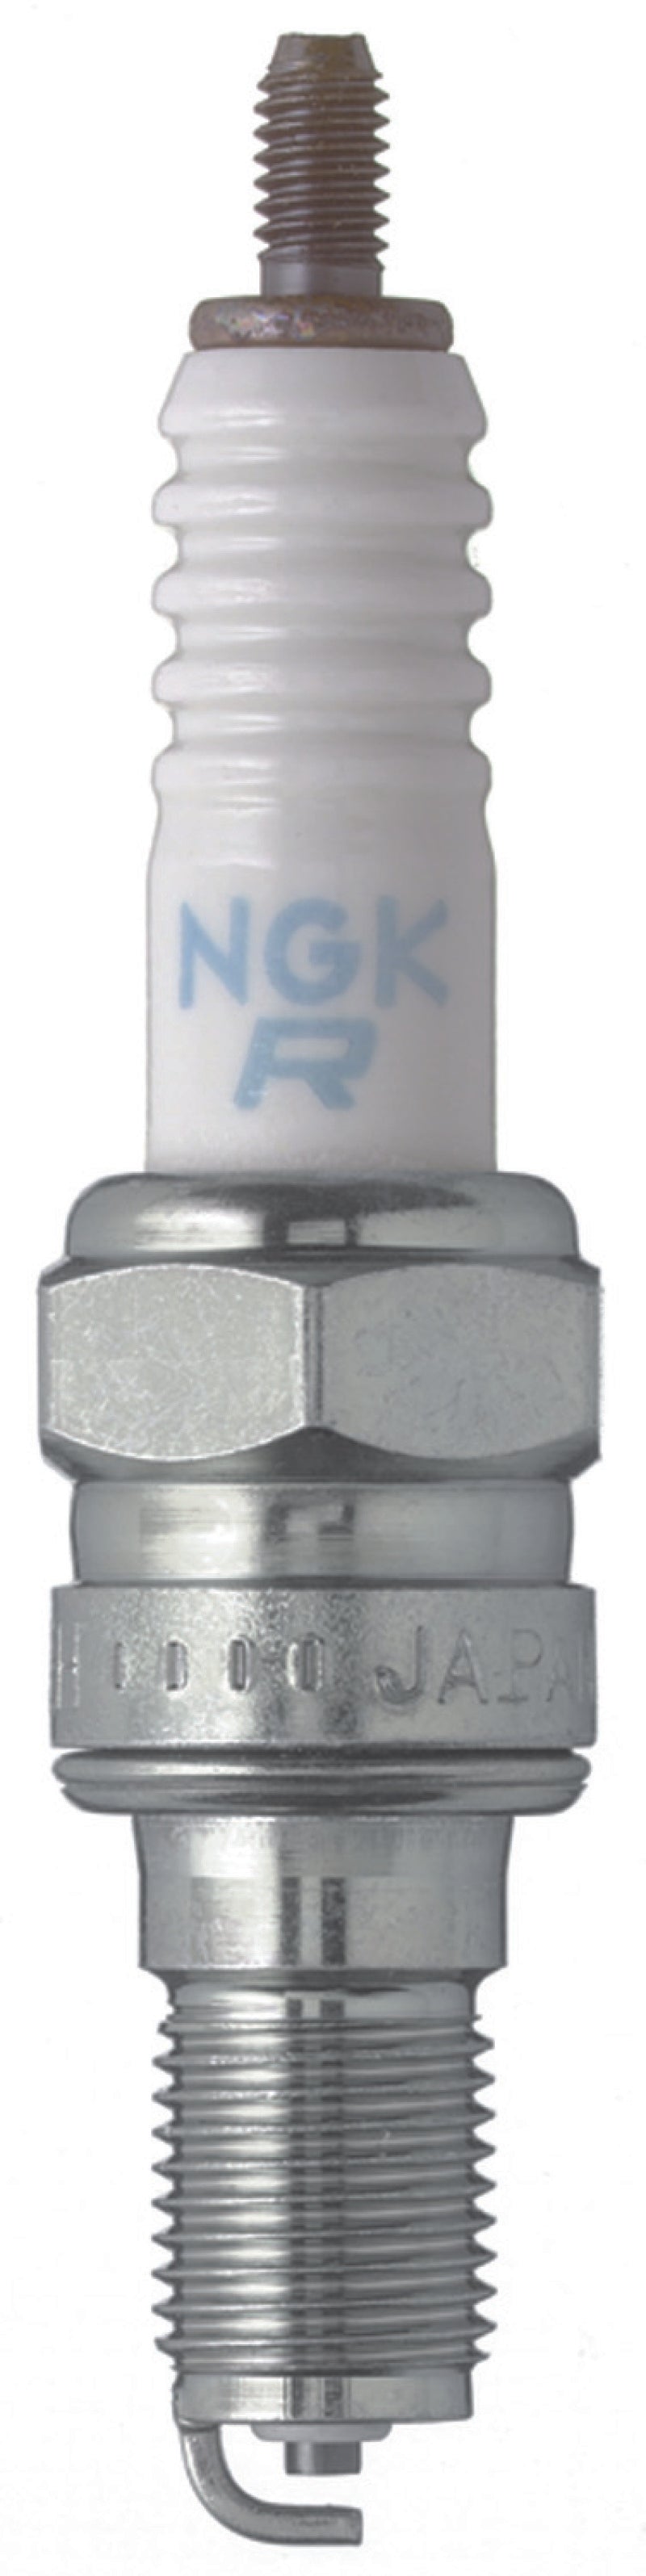 NGK Standard Spark Plug Box of 10 (CR7EH-9) -  Shop now at Performance Car Parts